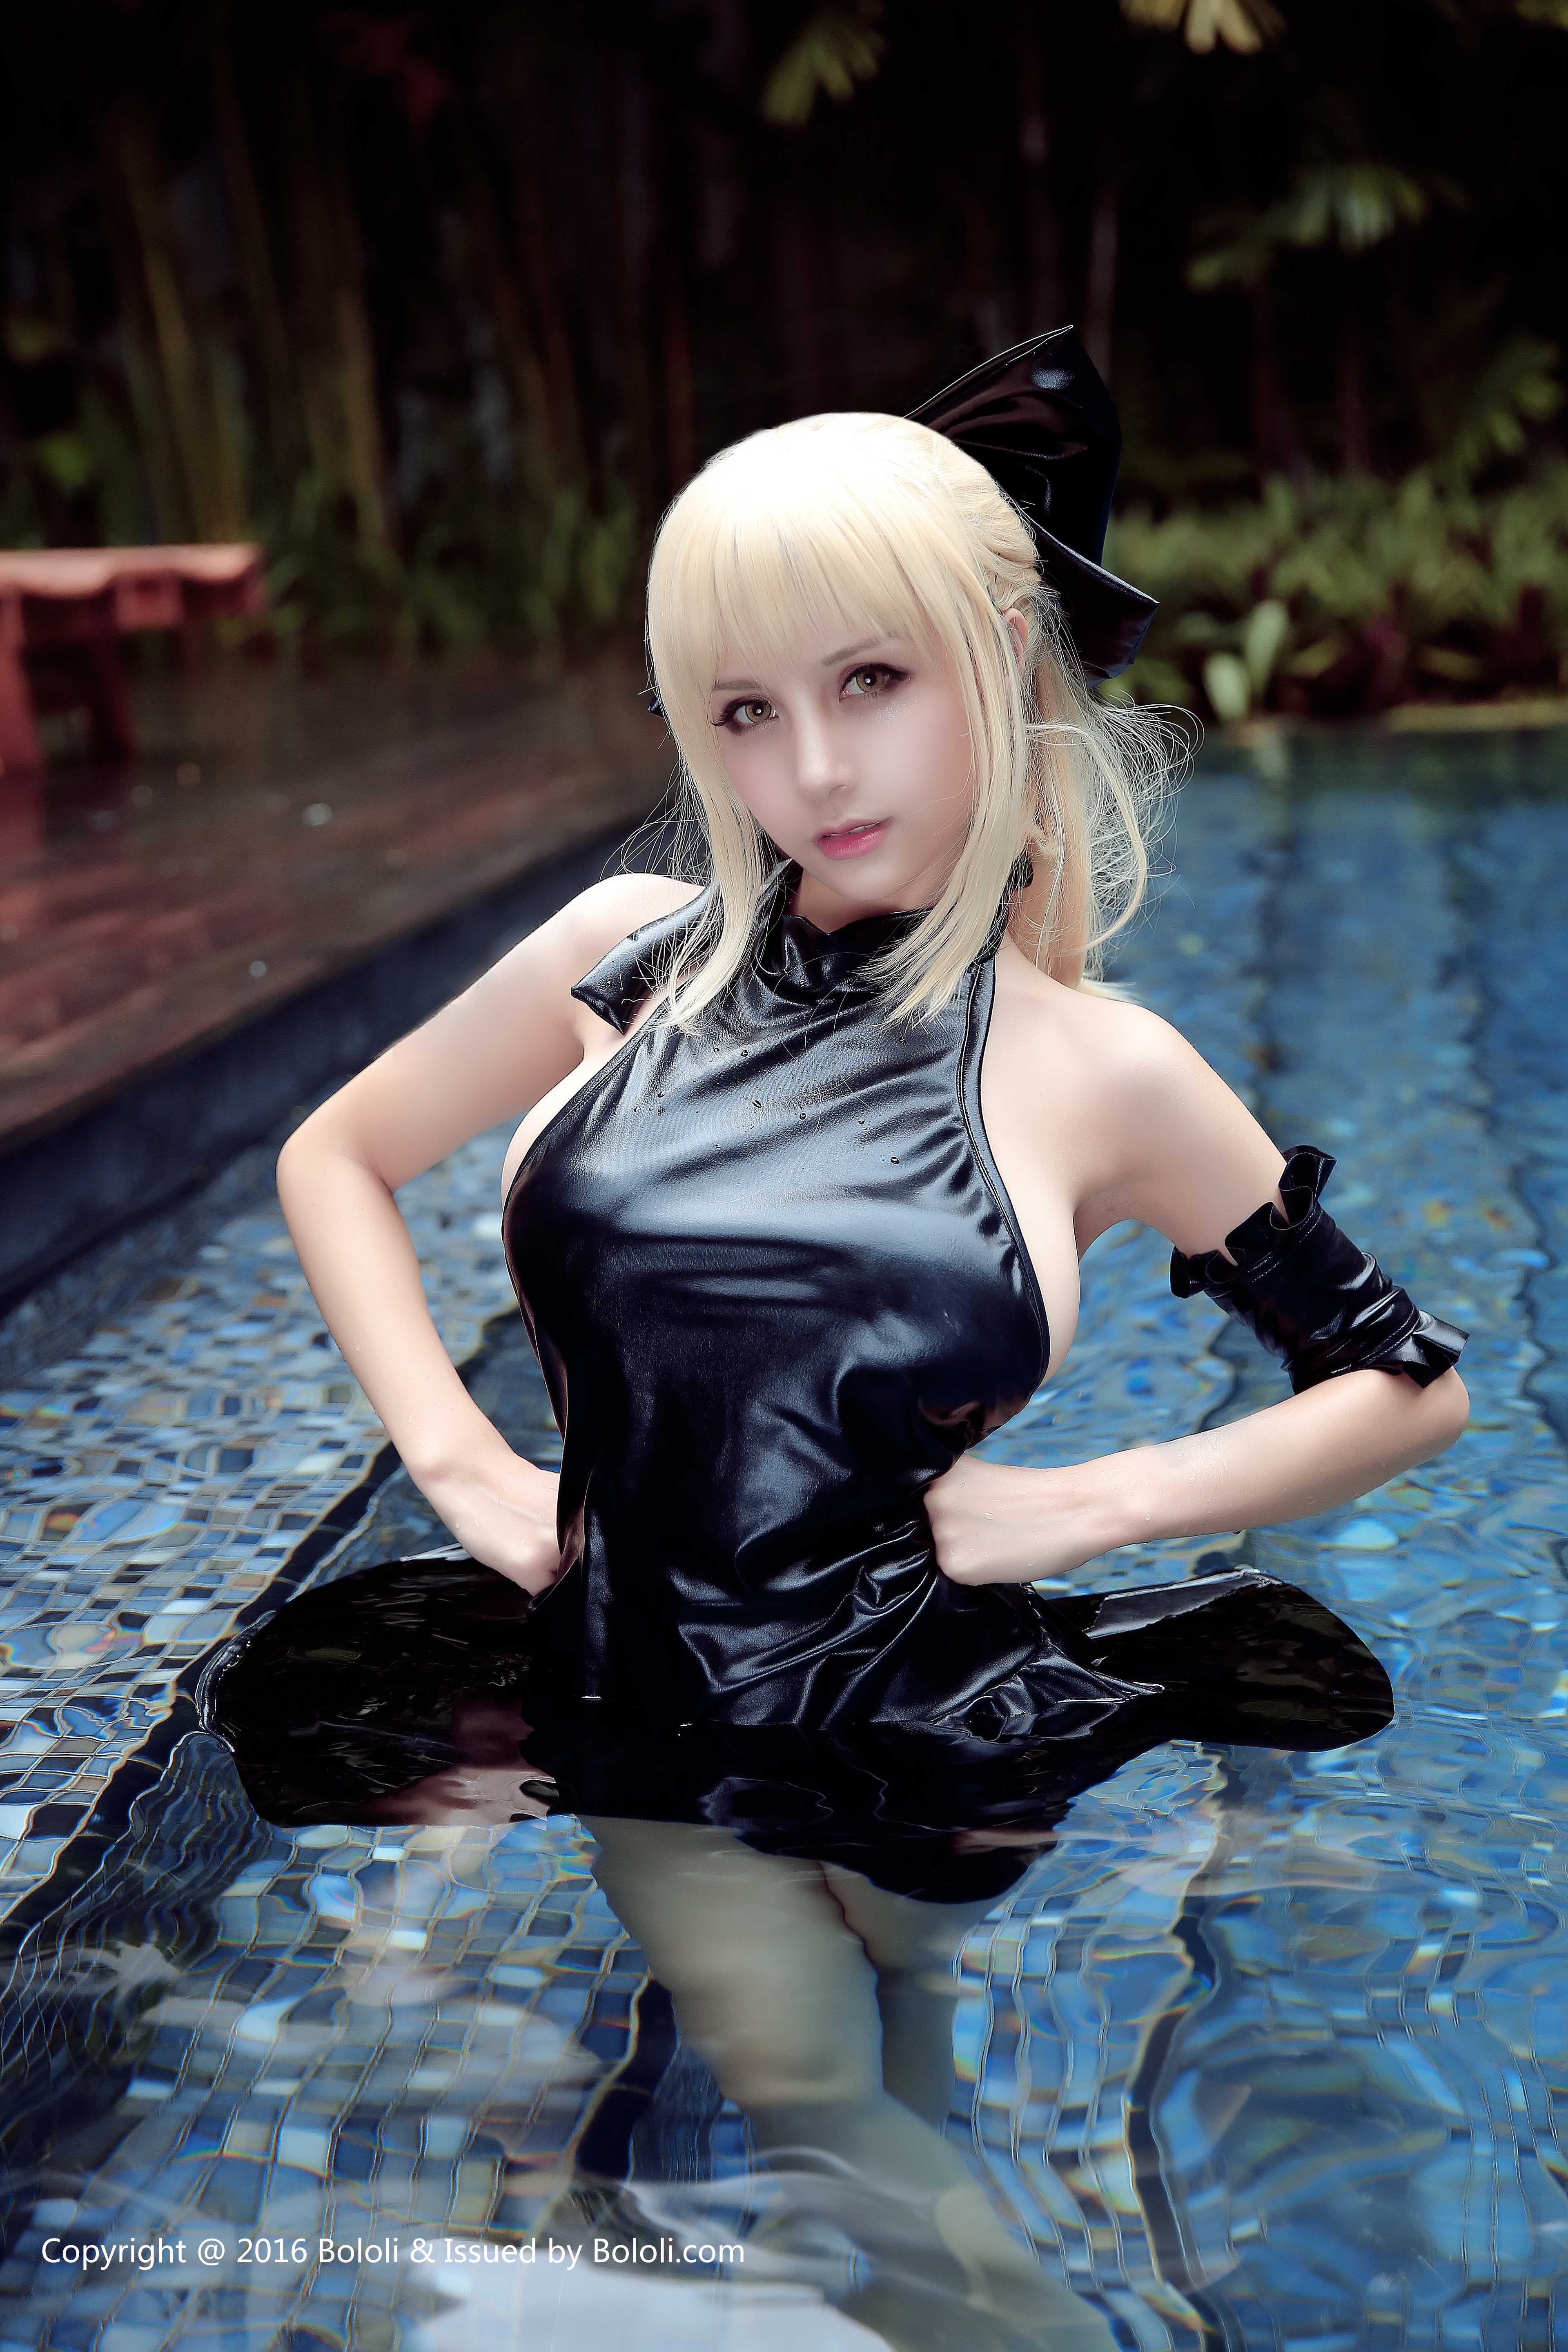 cool cosplay glamour